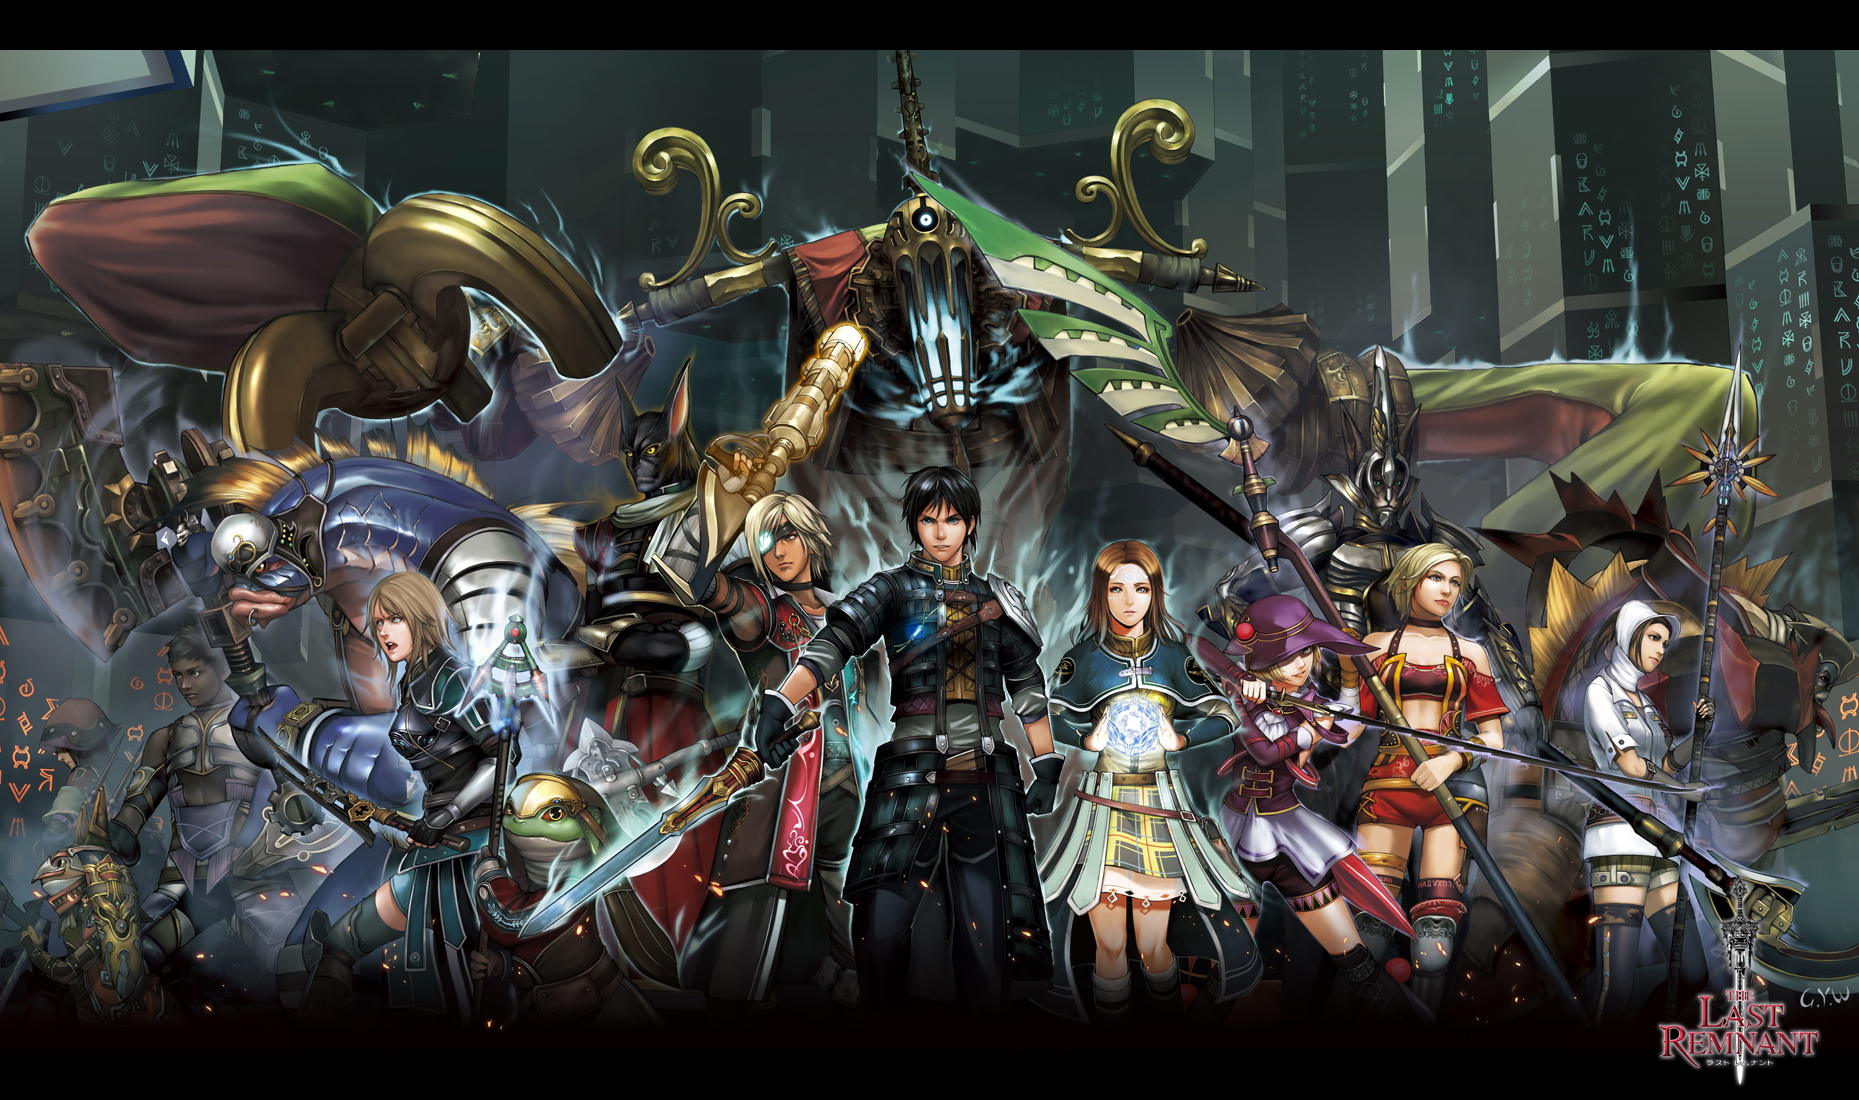 The Last Remnant Wallpapers